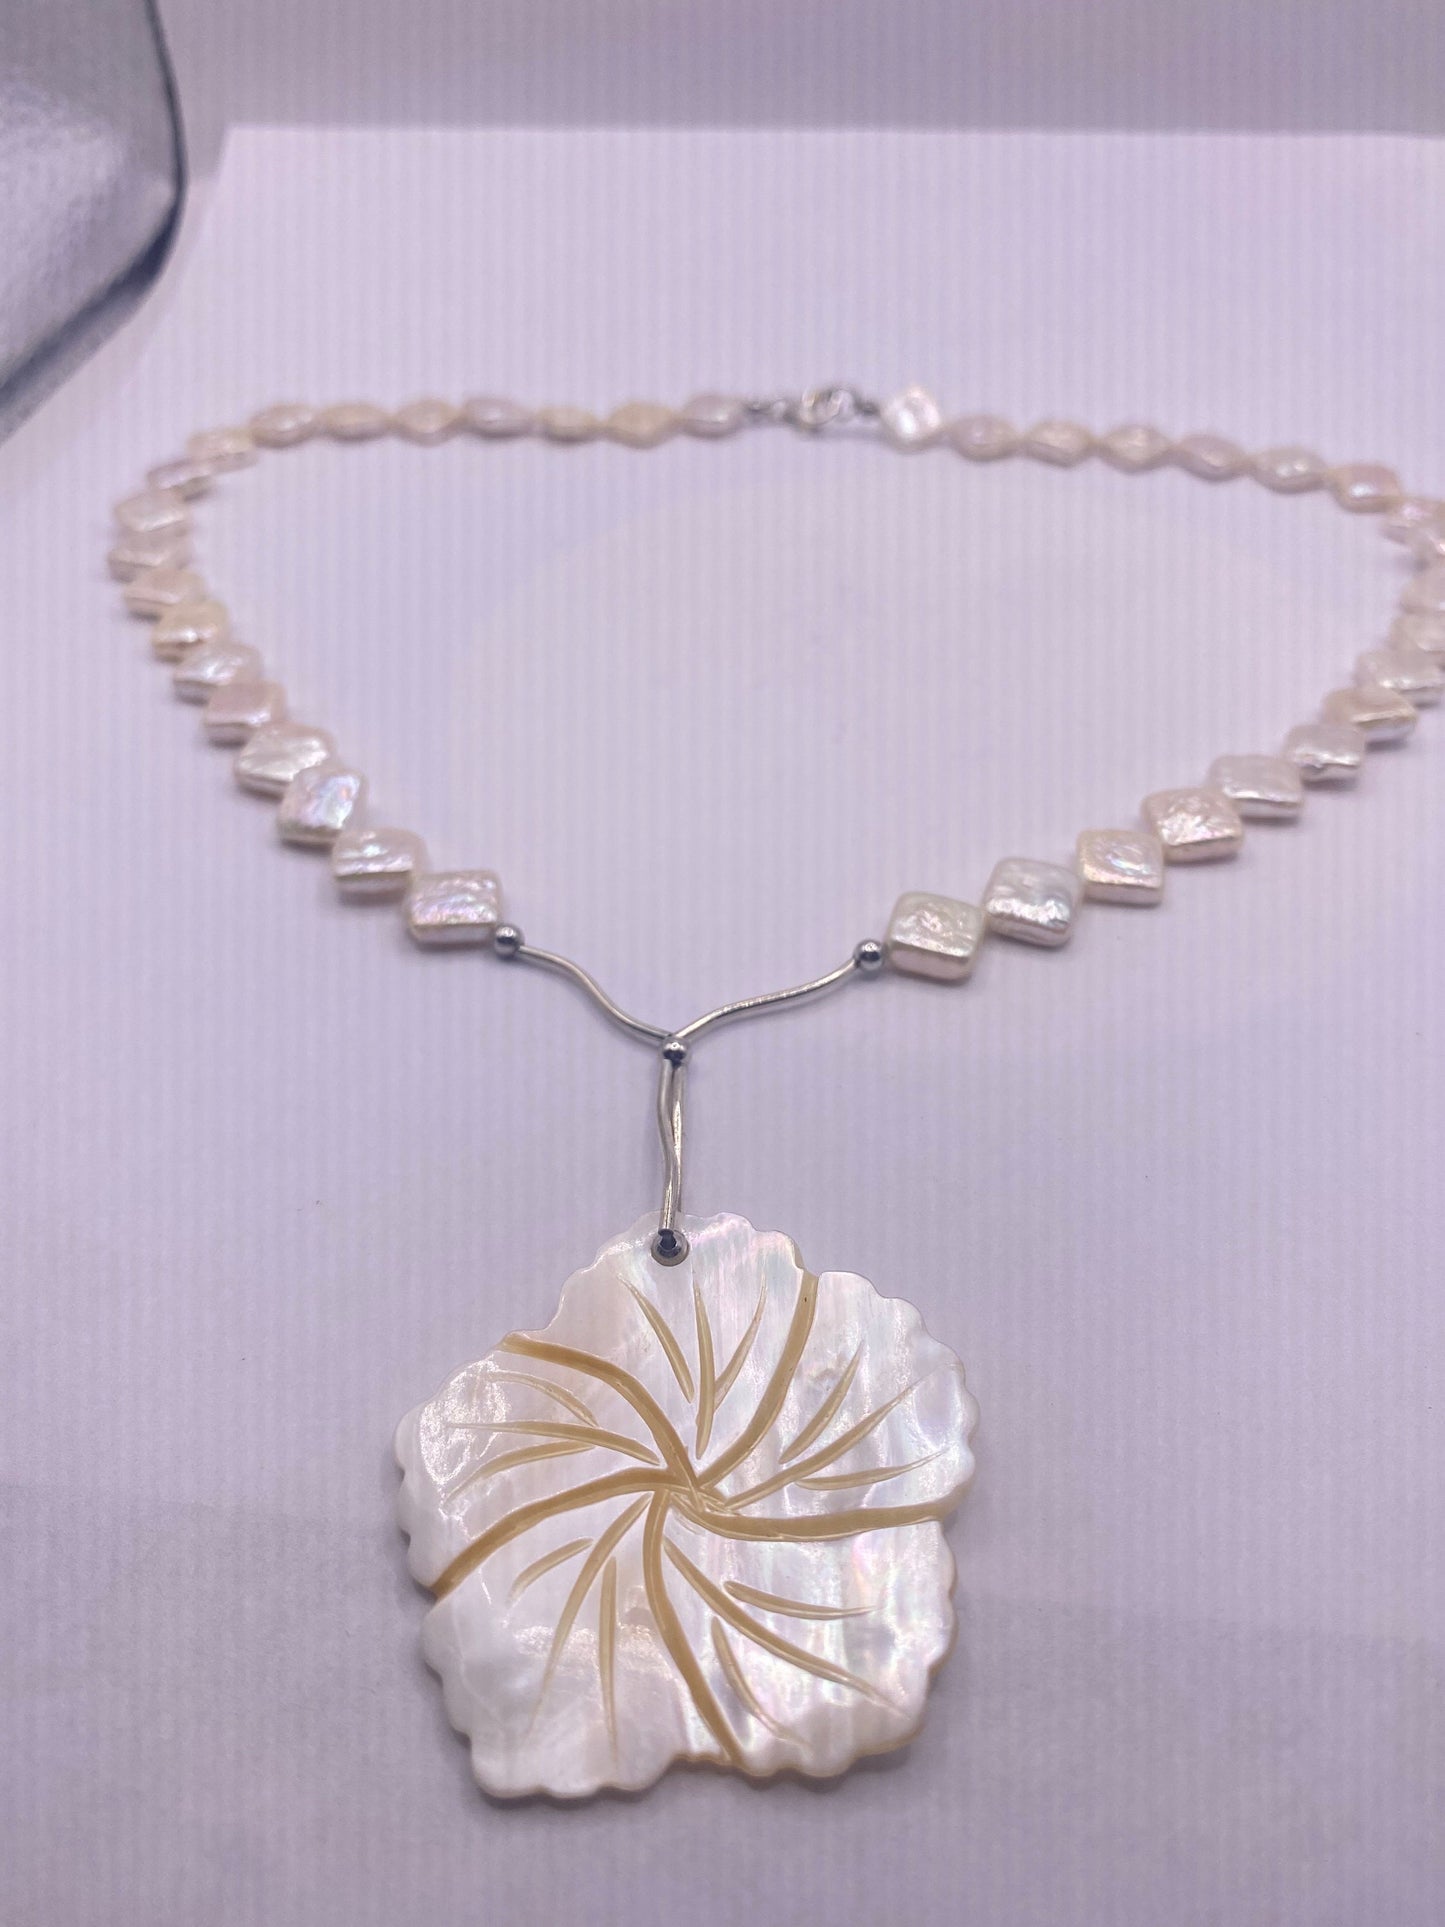 Vintage White Pearl 18 inch Flower Necklace